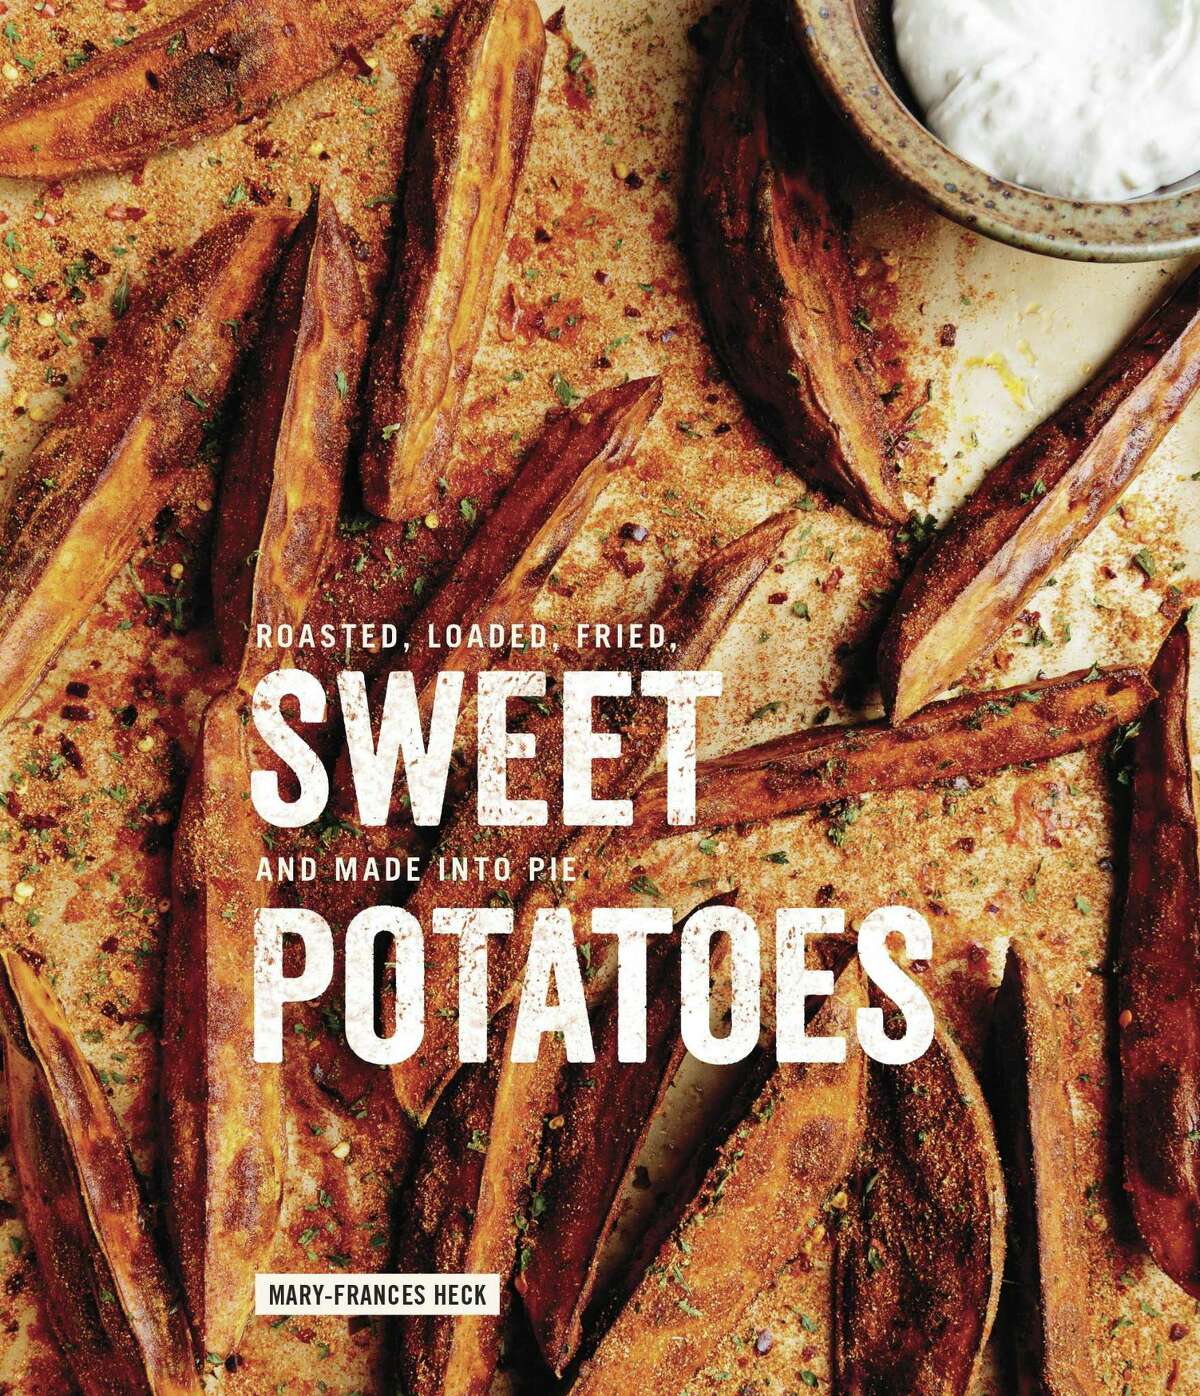 “Sweet Potatoes” book Reprinted from Sweet Potatoes. Copyright © 2017 by Mary-Frances Heck. Photographs copyright © 2017 by Kristin Teig. Published by Clarkson Potter/Publishers, an imprint of Penguin Random House, LLC.